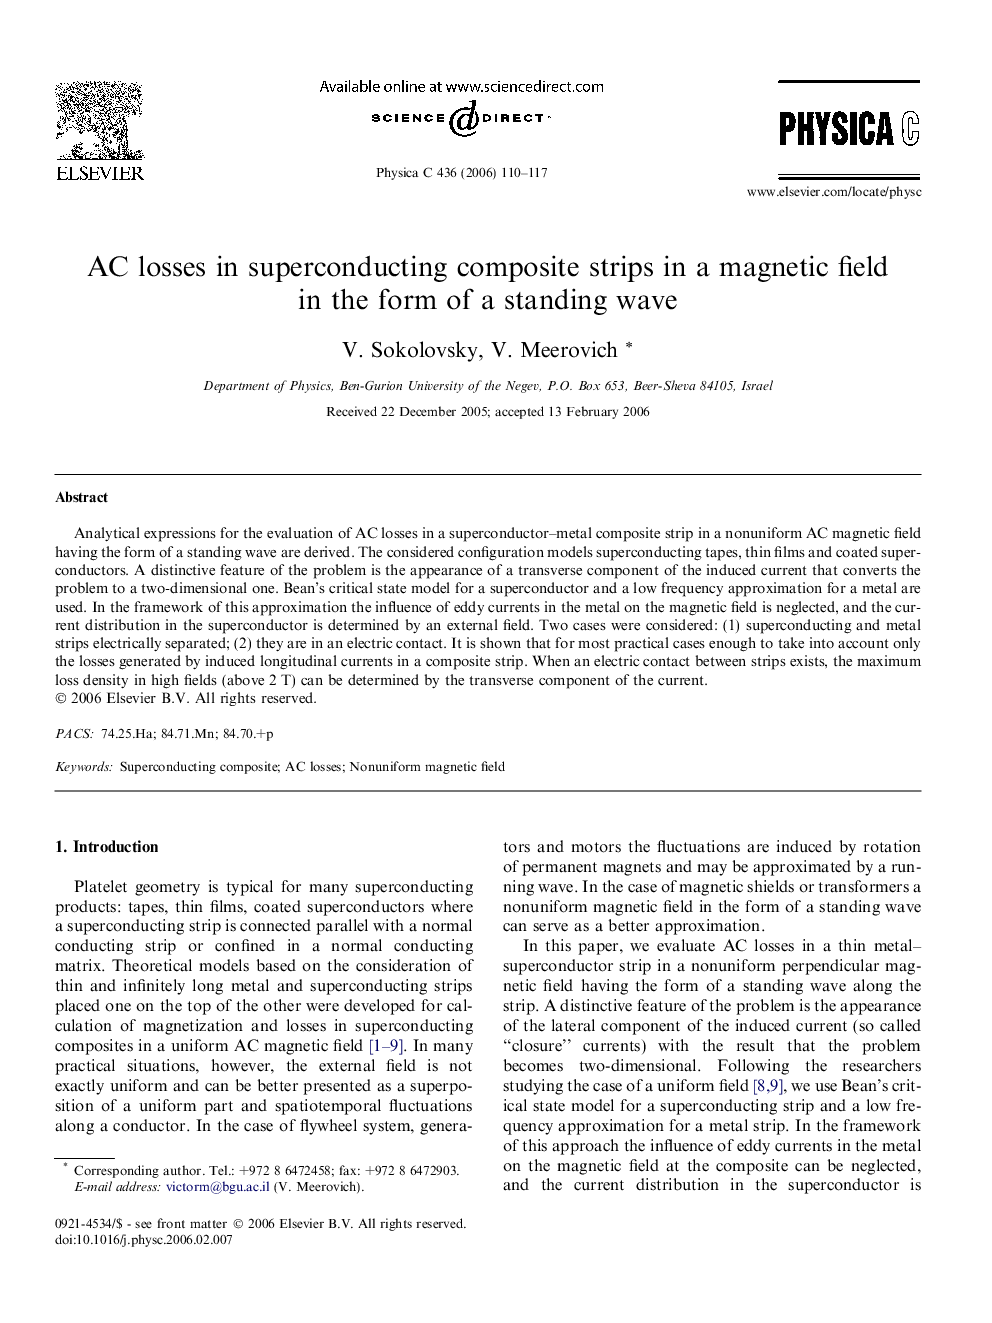 AC losses in superconducting composite strips in a magnetic field in the form of a standing wave